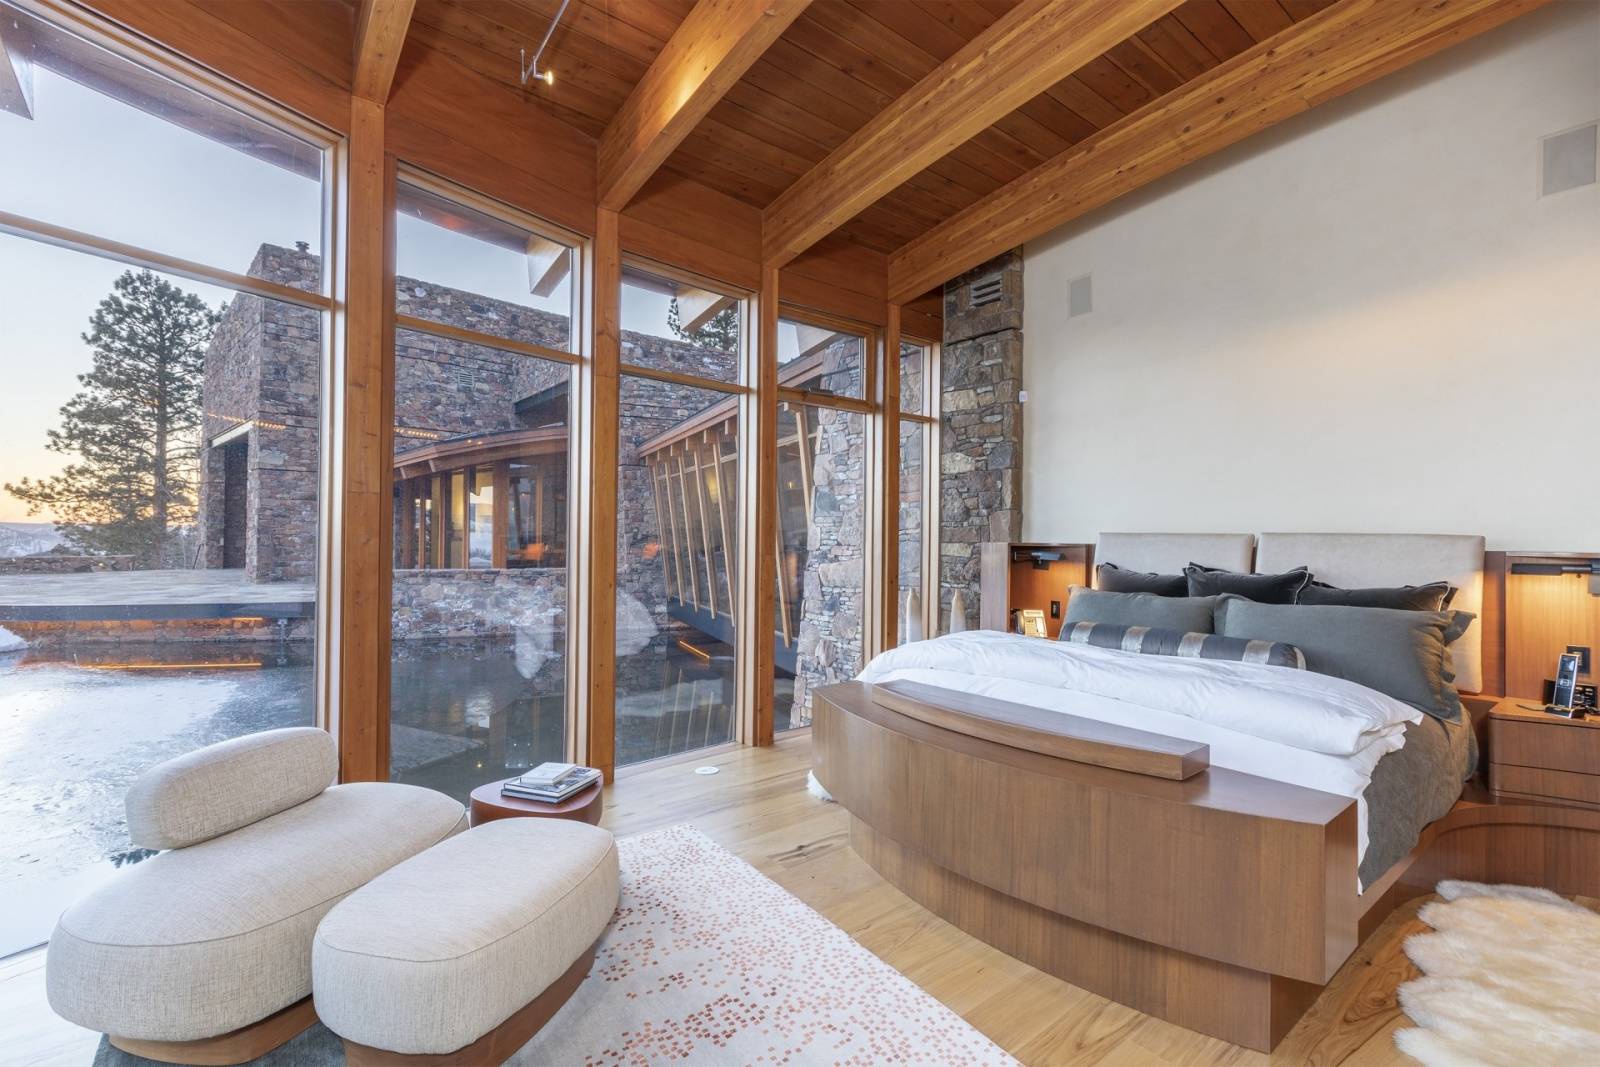 Telluride Vacation Rentals, PaGomo* - Walk across the private bridge to the East Pod to the main master bedroom which basks in the natural sunlight with panoramic views of the majestic San Juan Mountains and trout pond underway.